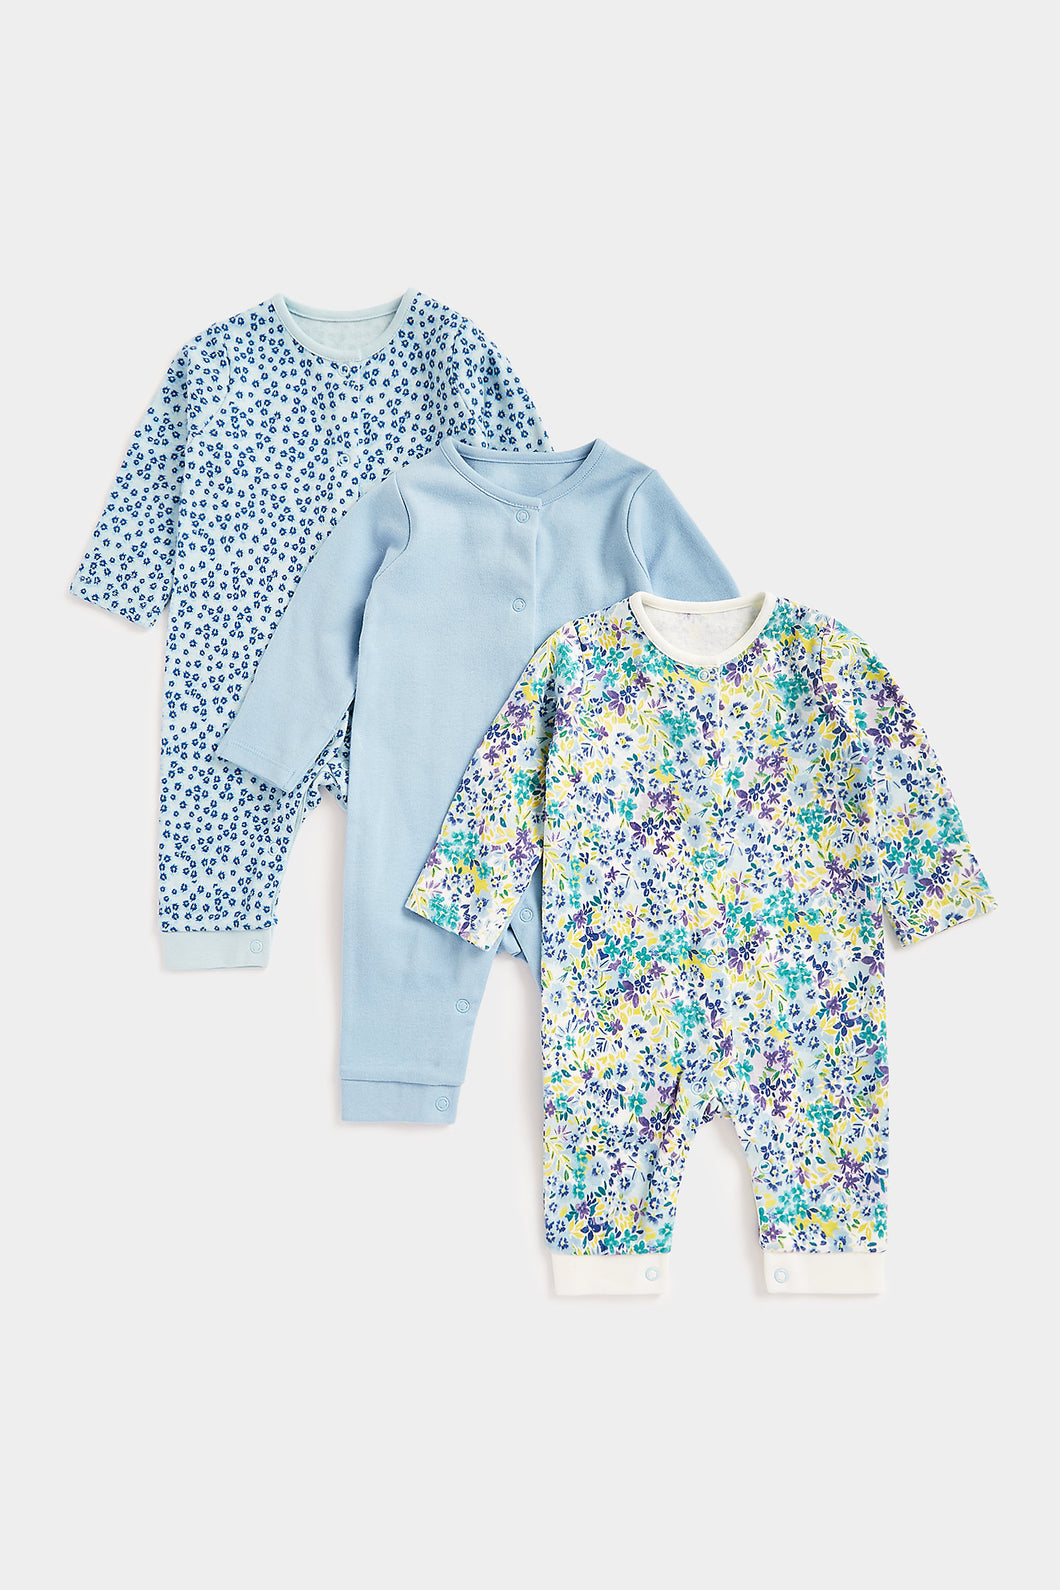 Mothercare Floral Footless Sleepsuits - 3 Pack